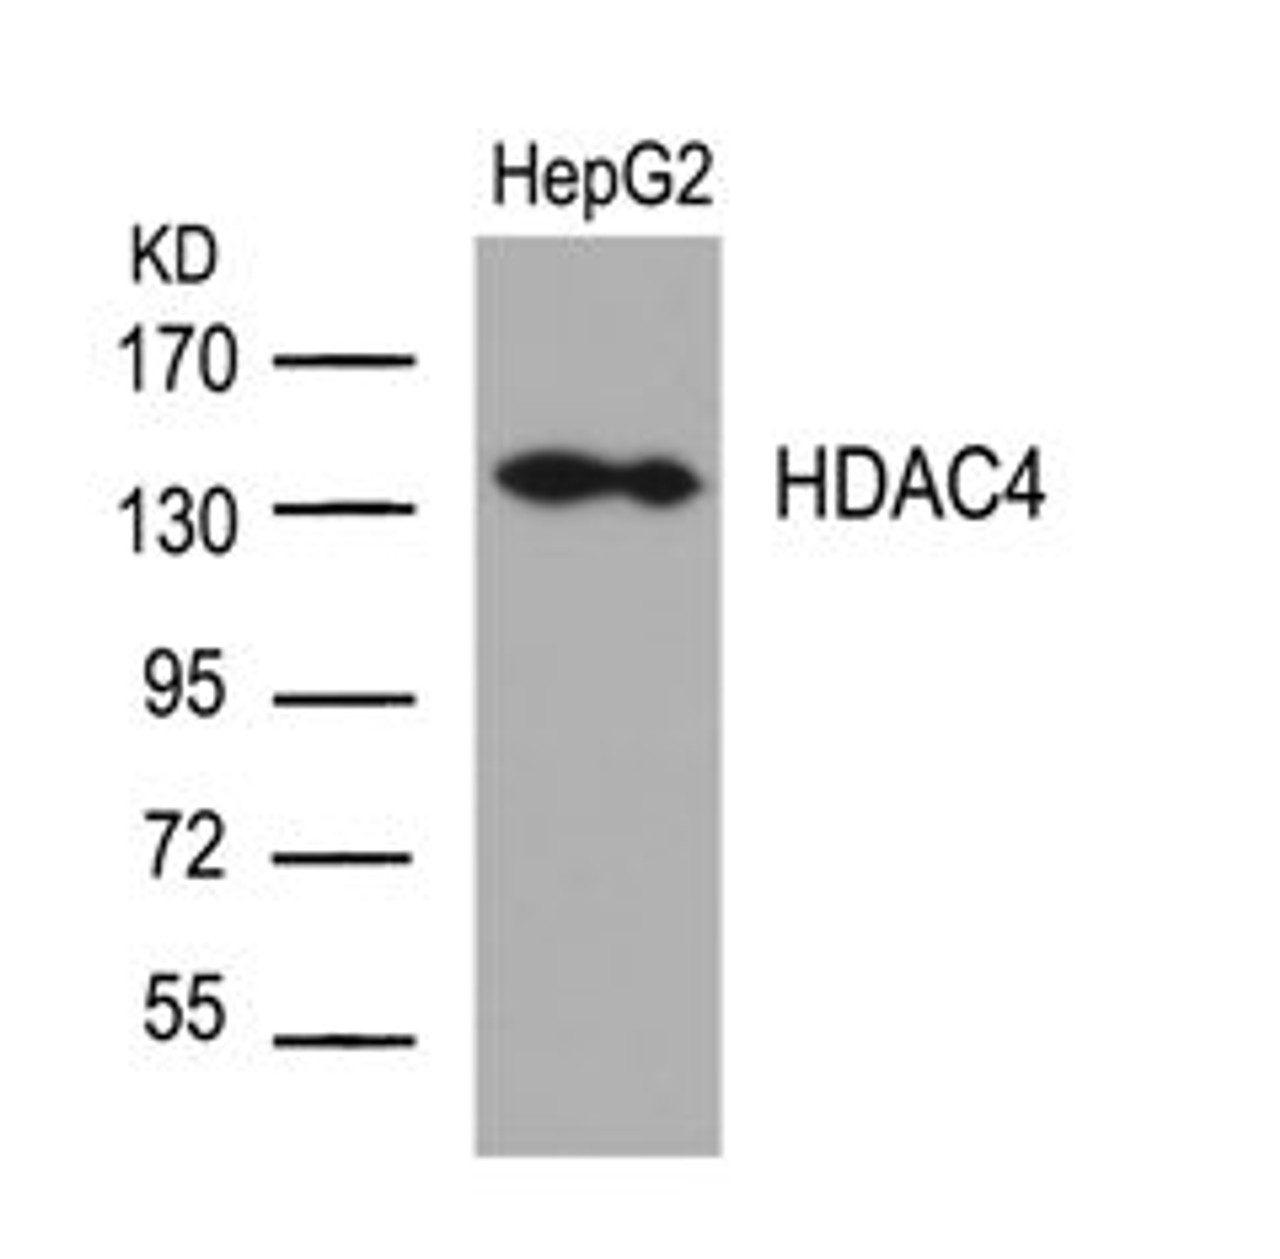 Western blot analysis of lysed extracts from HepG2 cells using HDAC4 (Ab-632) .